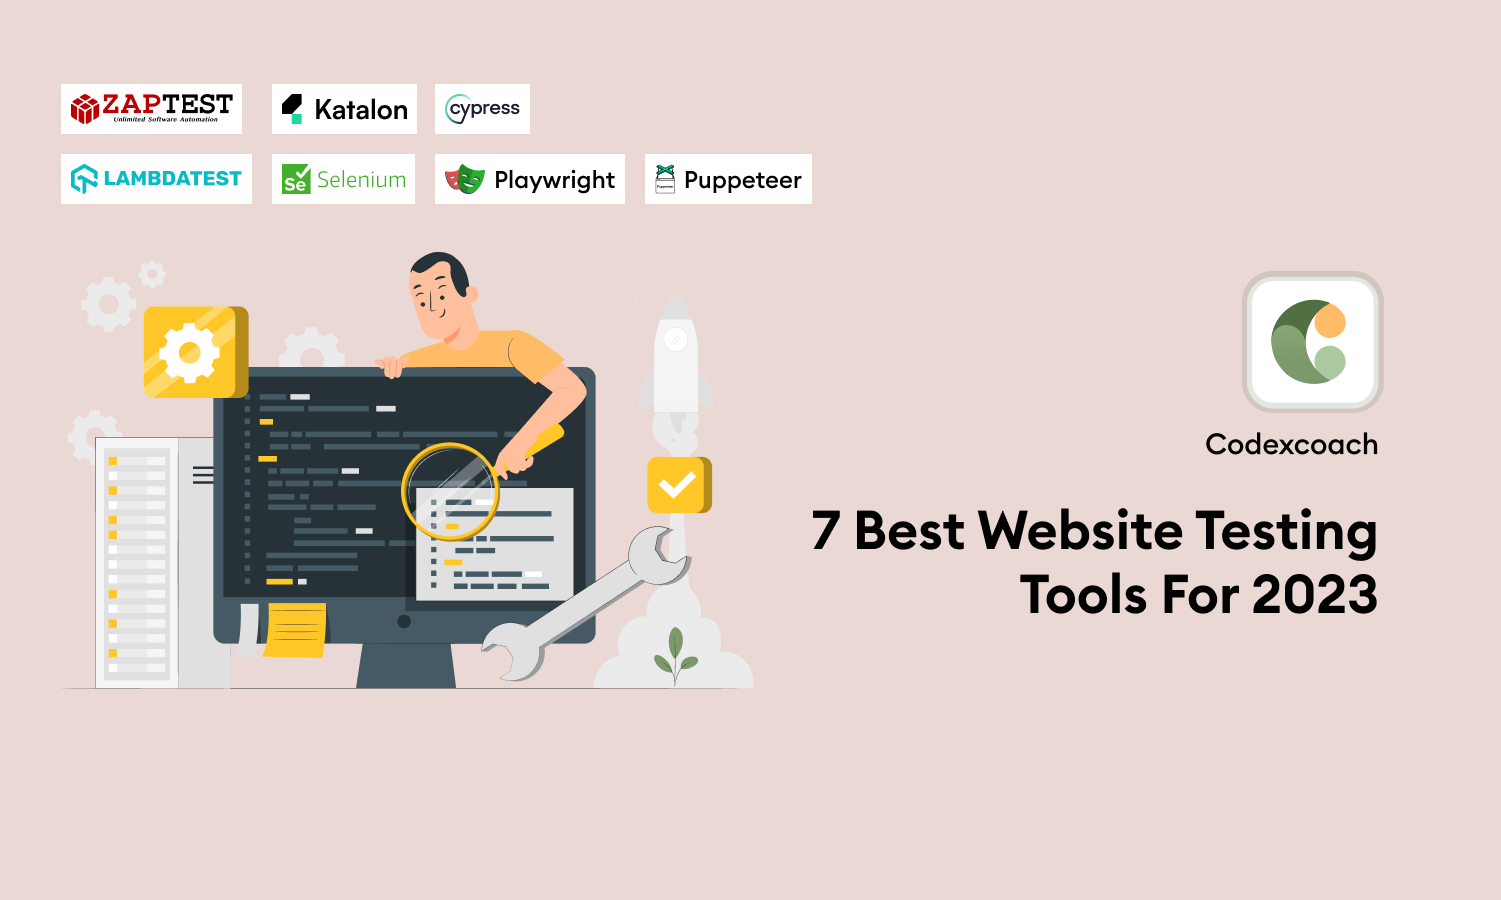 7 Best Website Testing Tools For 2023